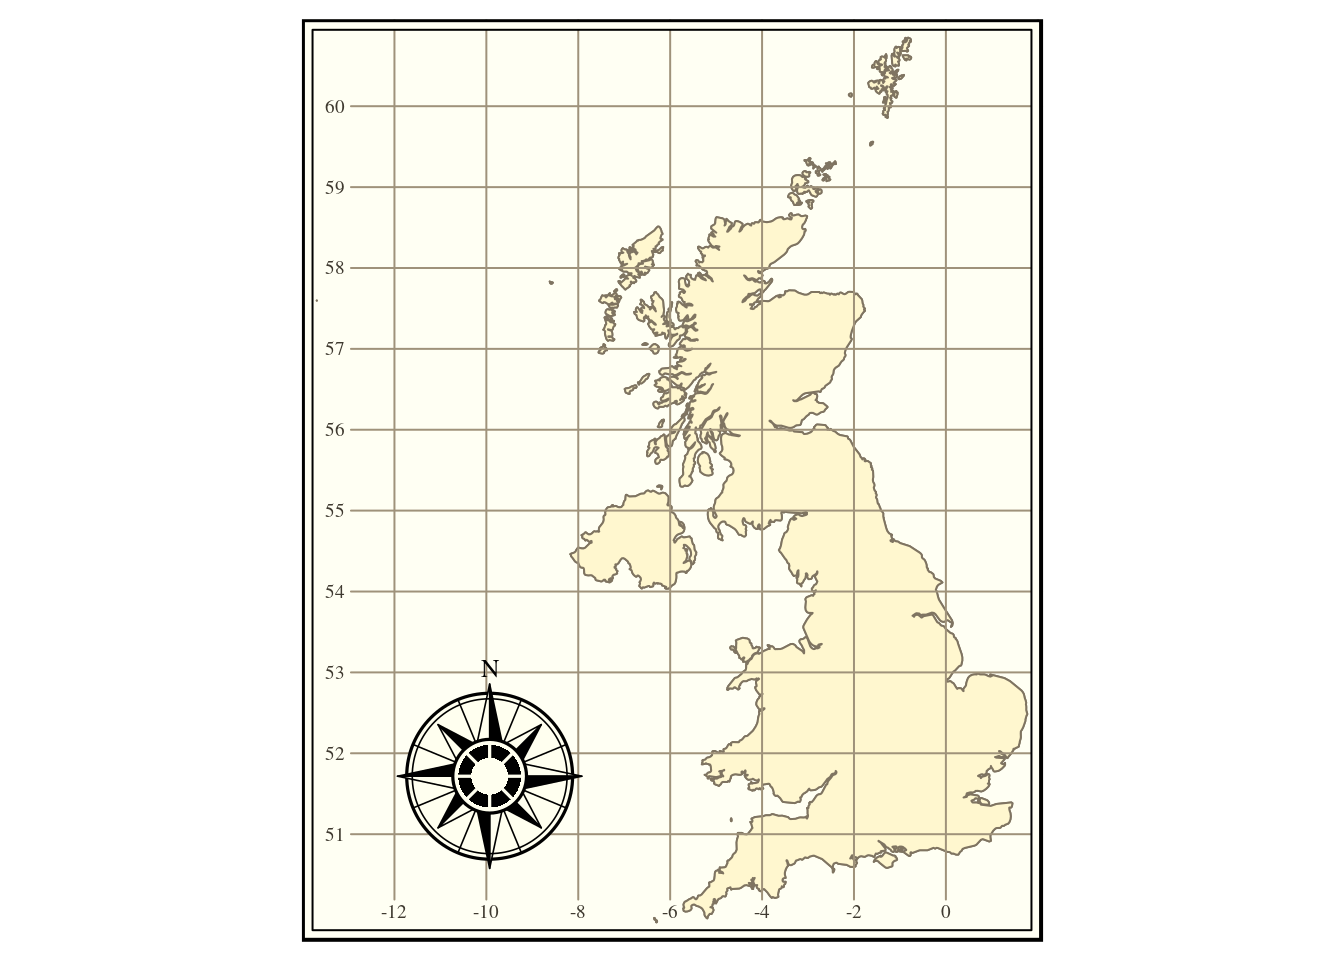 Map of the UK shown in a very traditional cartographic style